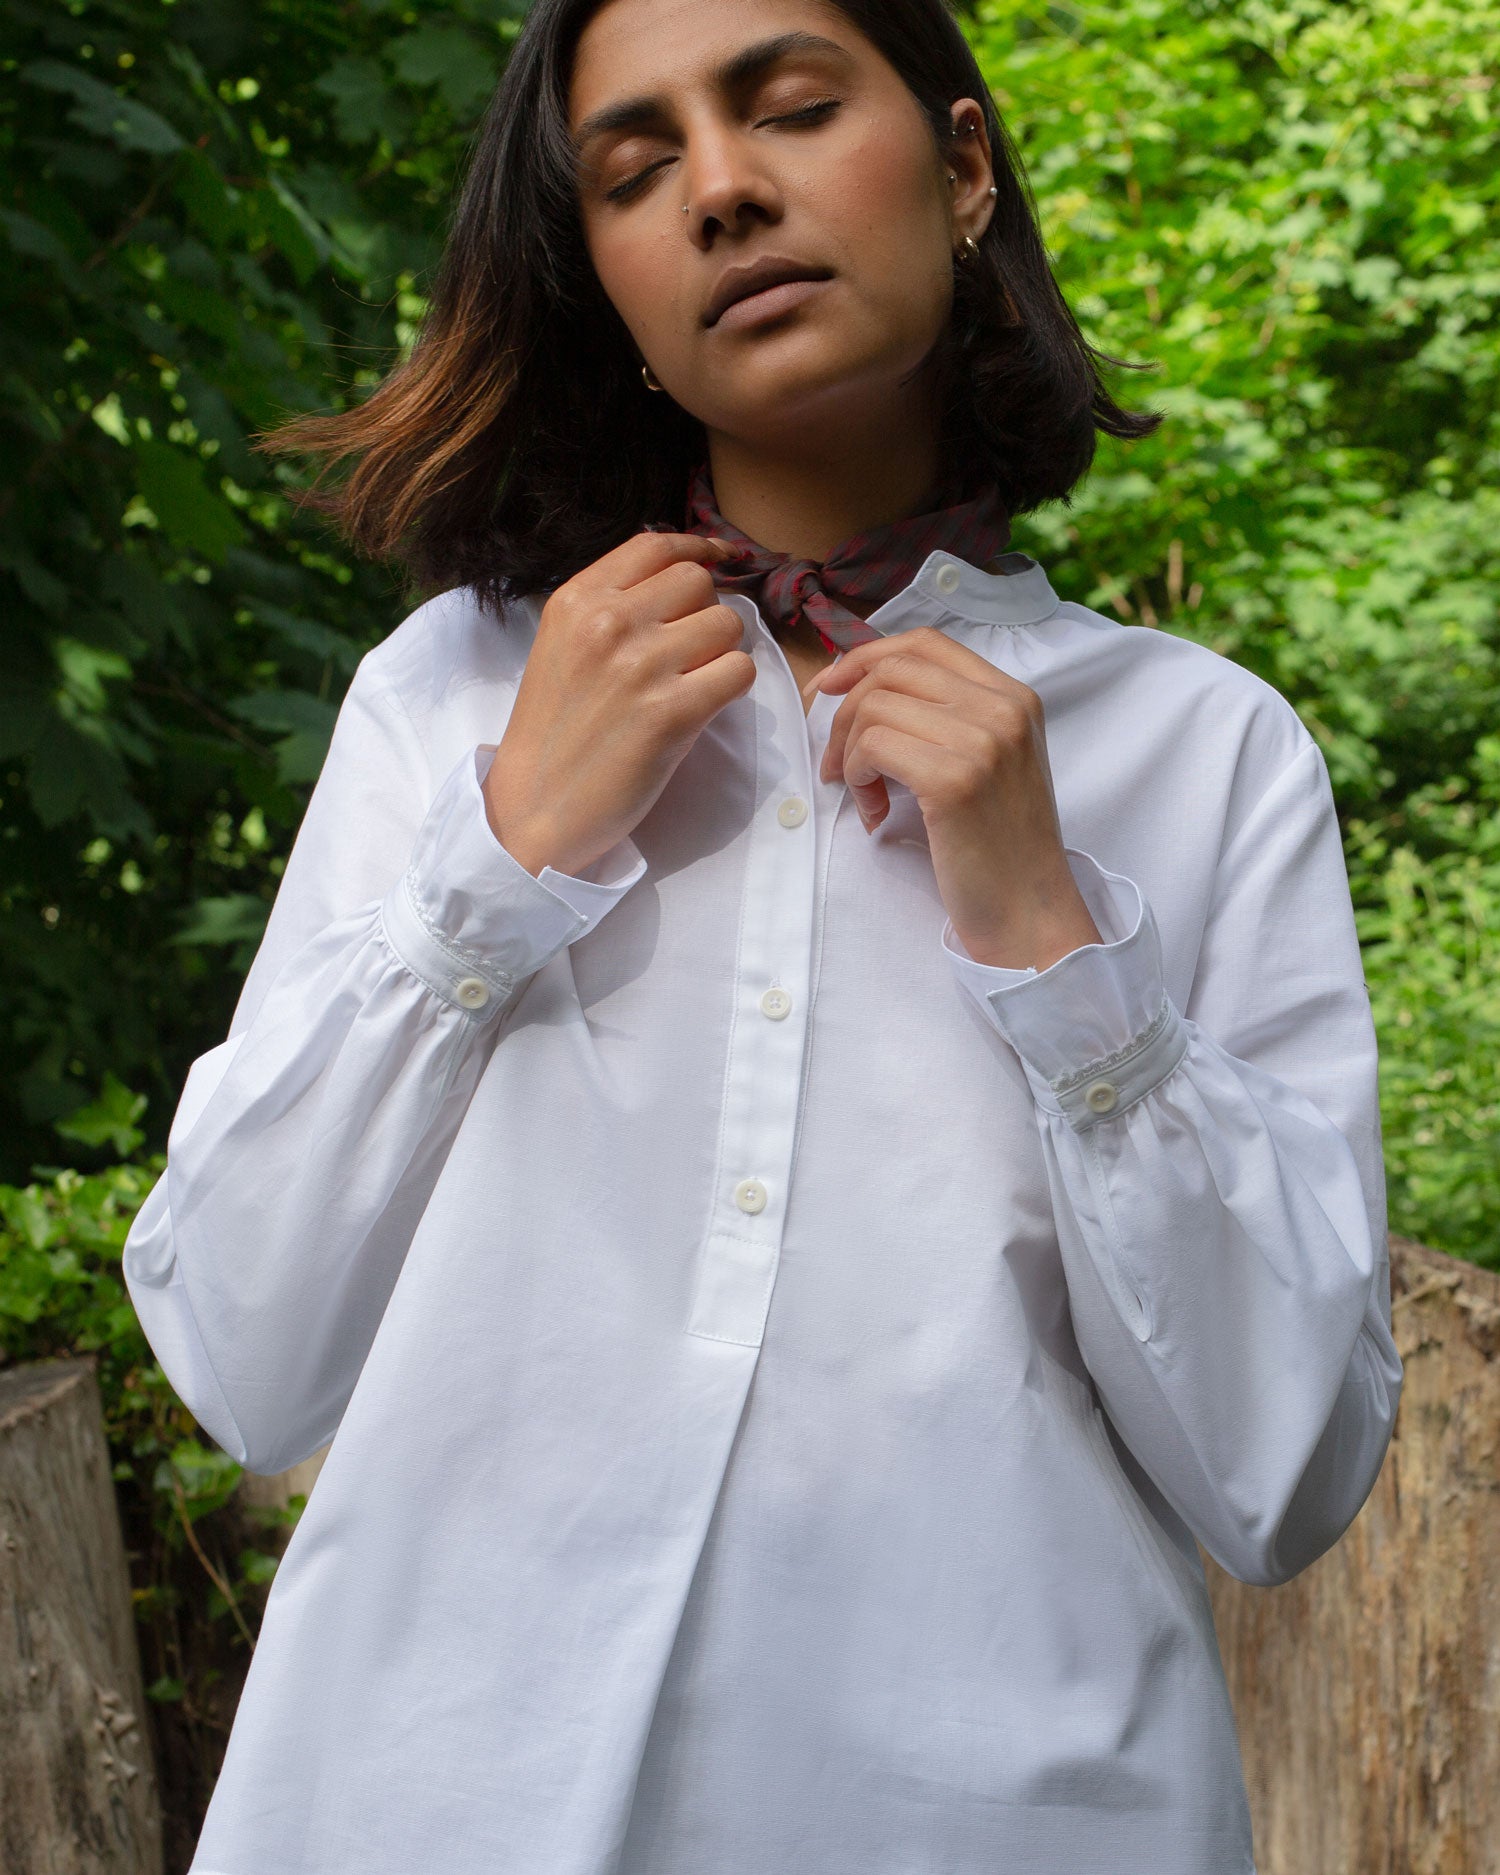 Model has eyes closed and is wearing Saywood's white recycled cotton blouse, Marie Blouse. She pulls at a red check neck tie at her neck, and the frilled cuffs are visible.